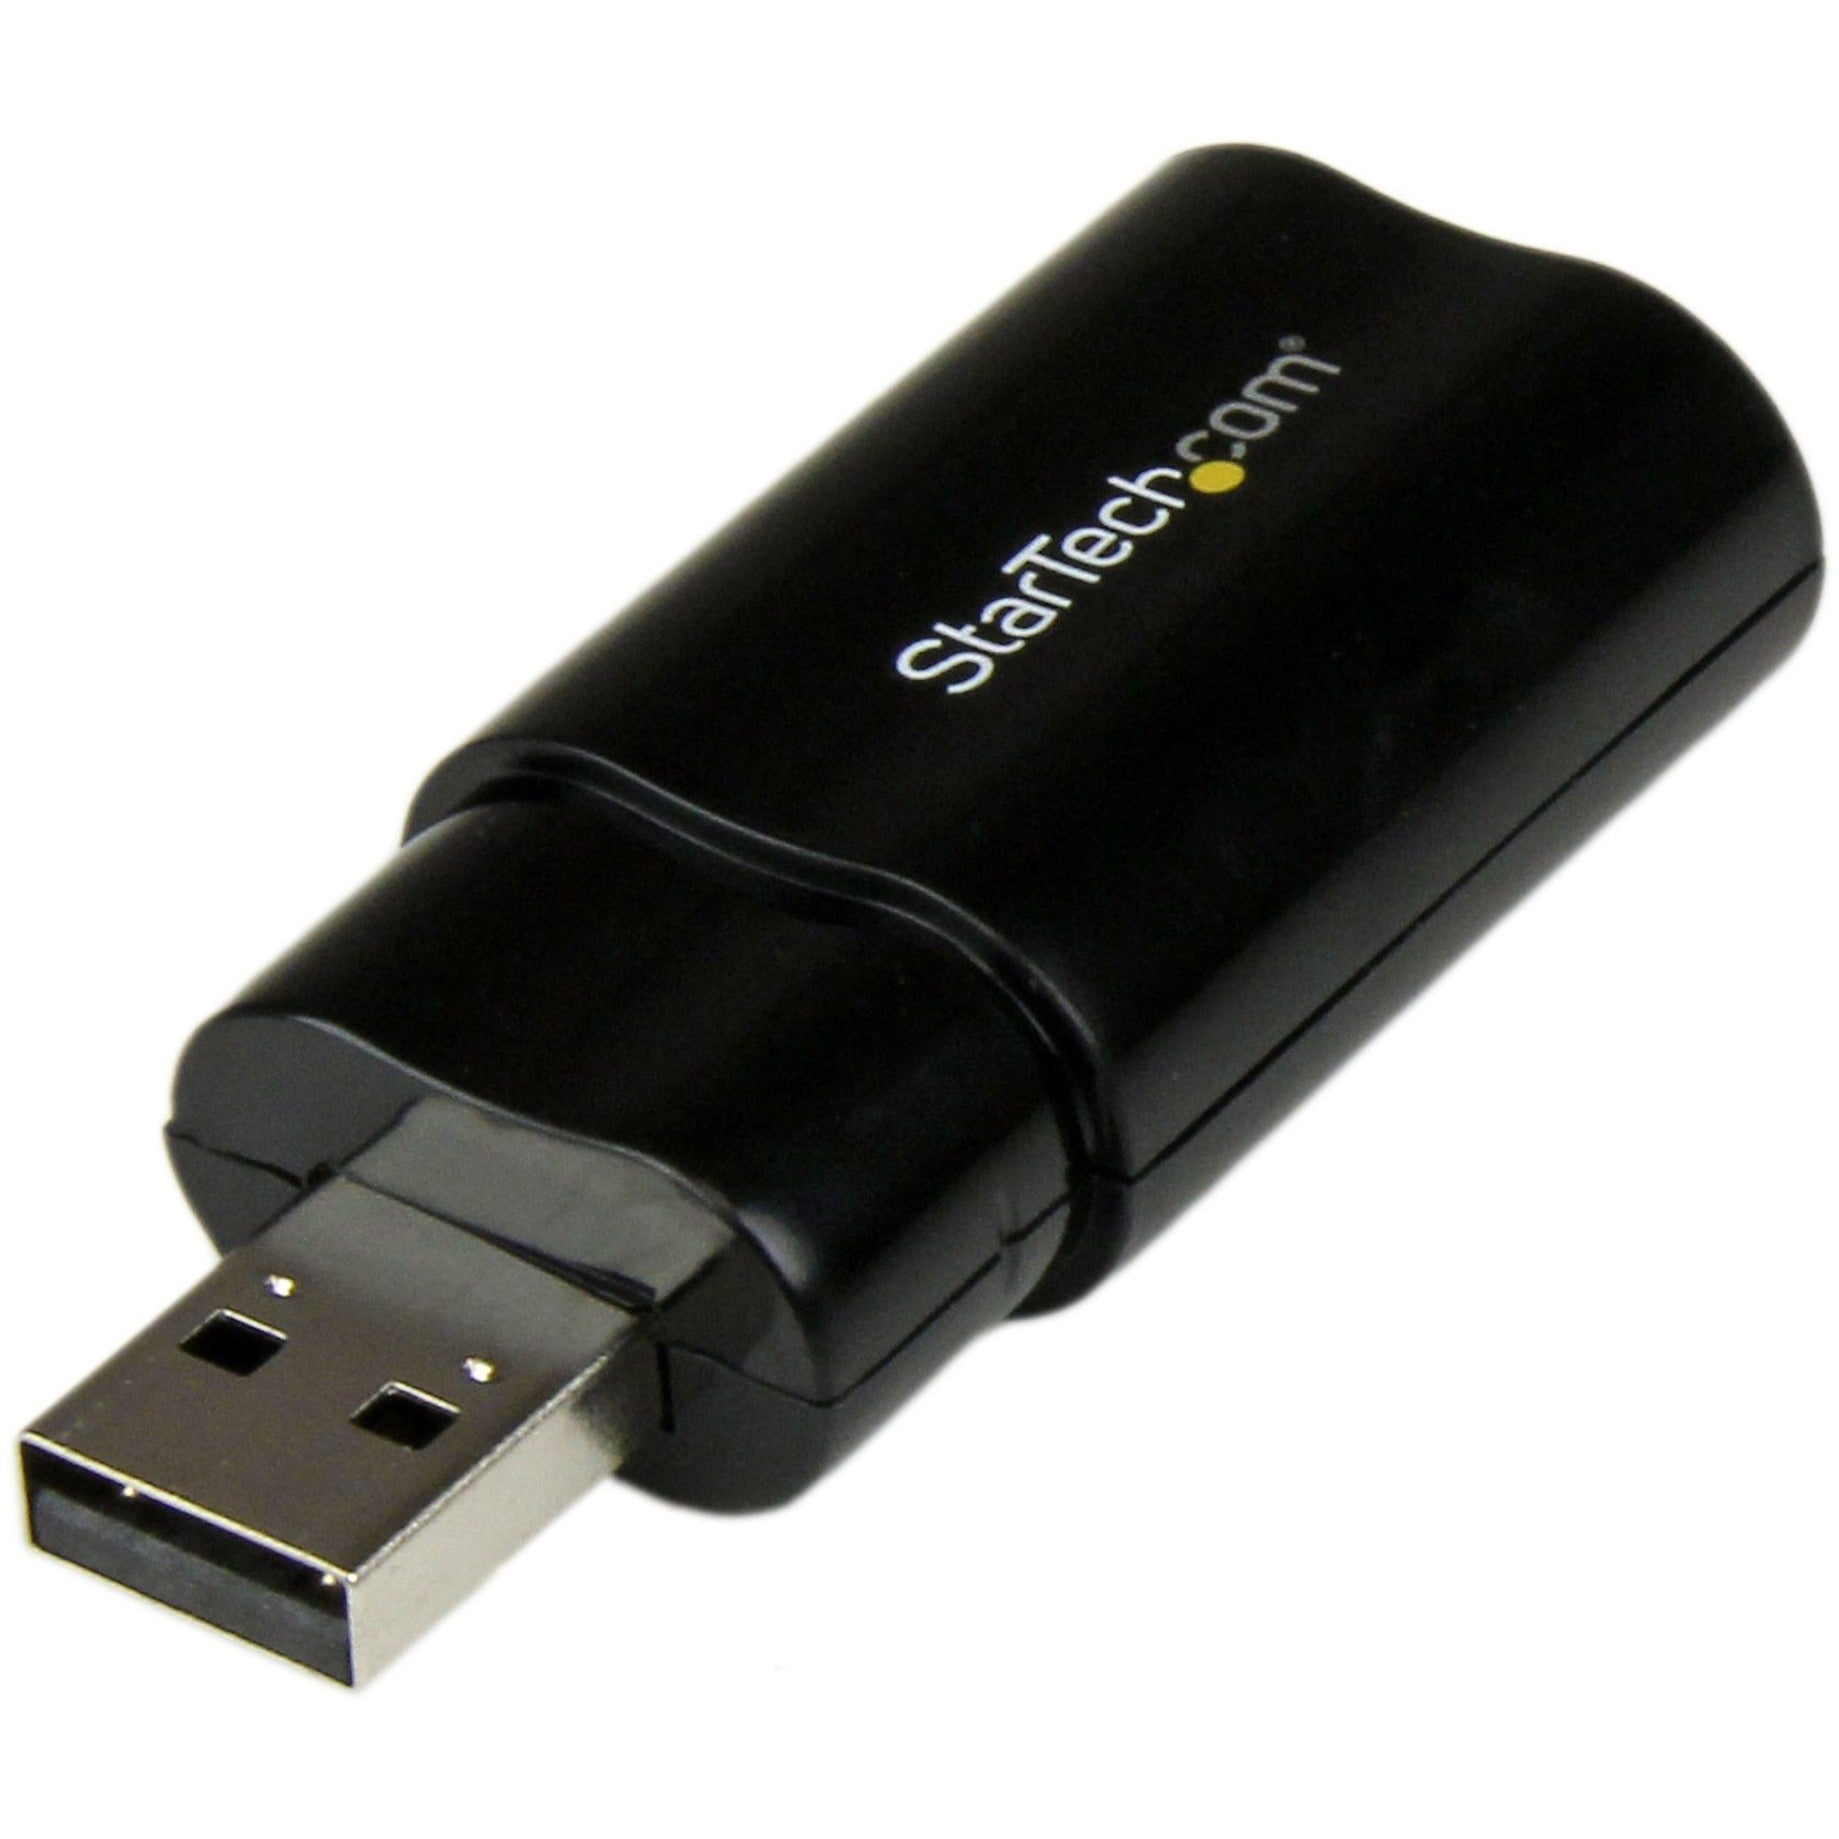 StarTech.com ICUSBAUDIOB USB 2.0 to External Stereo Audio Adapter, Plug and Play, TAA Compliant